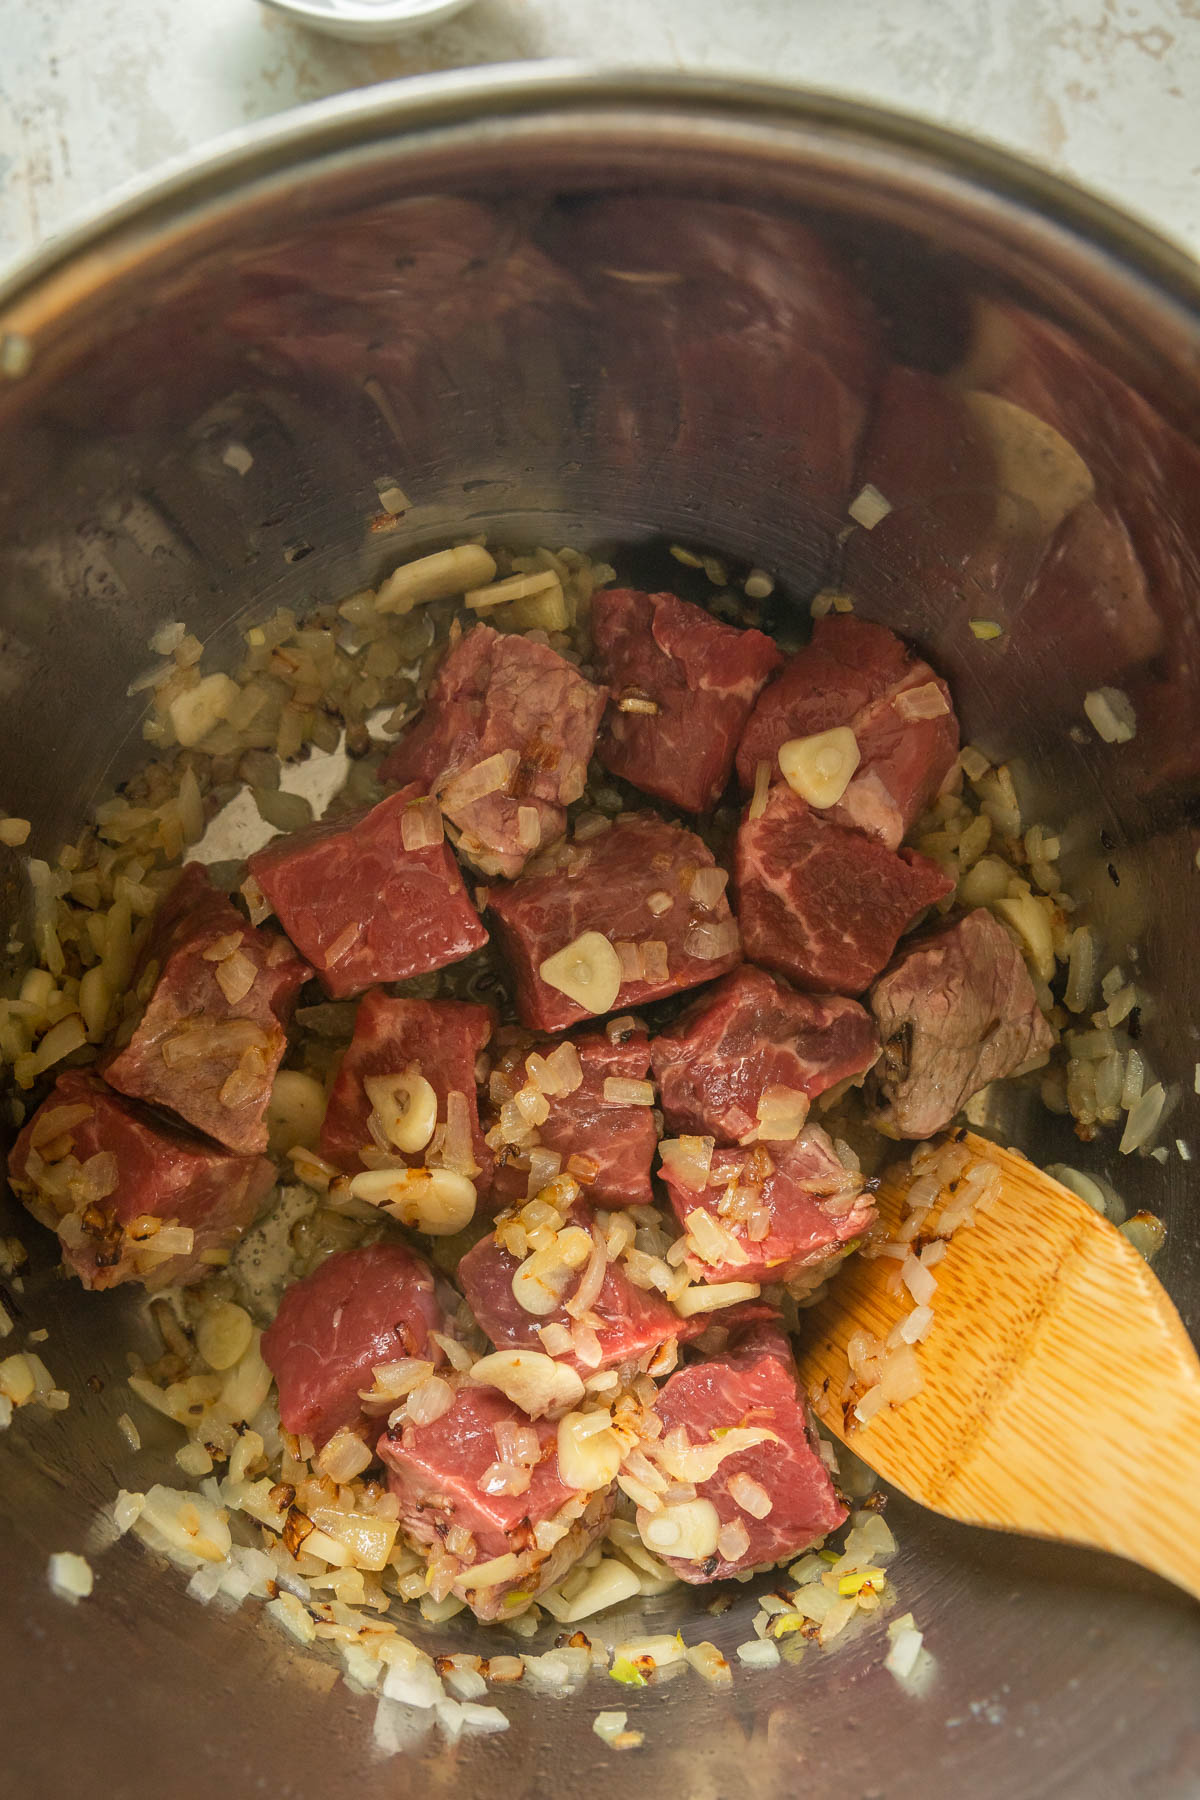 Beef cubes before cooking in a pan.